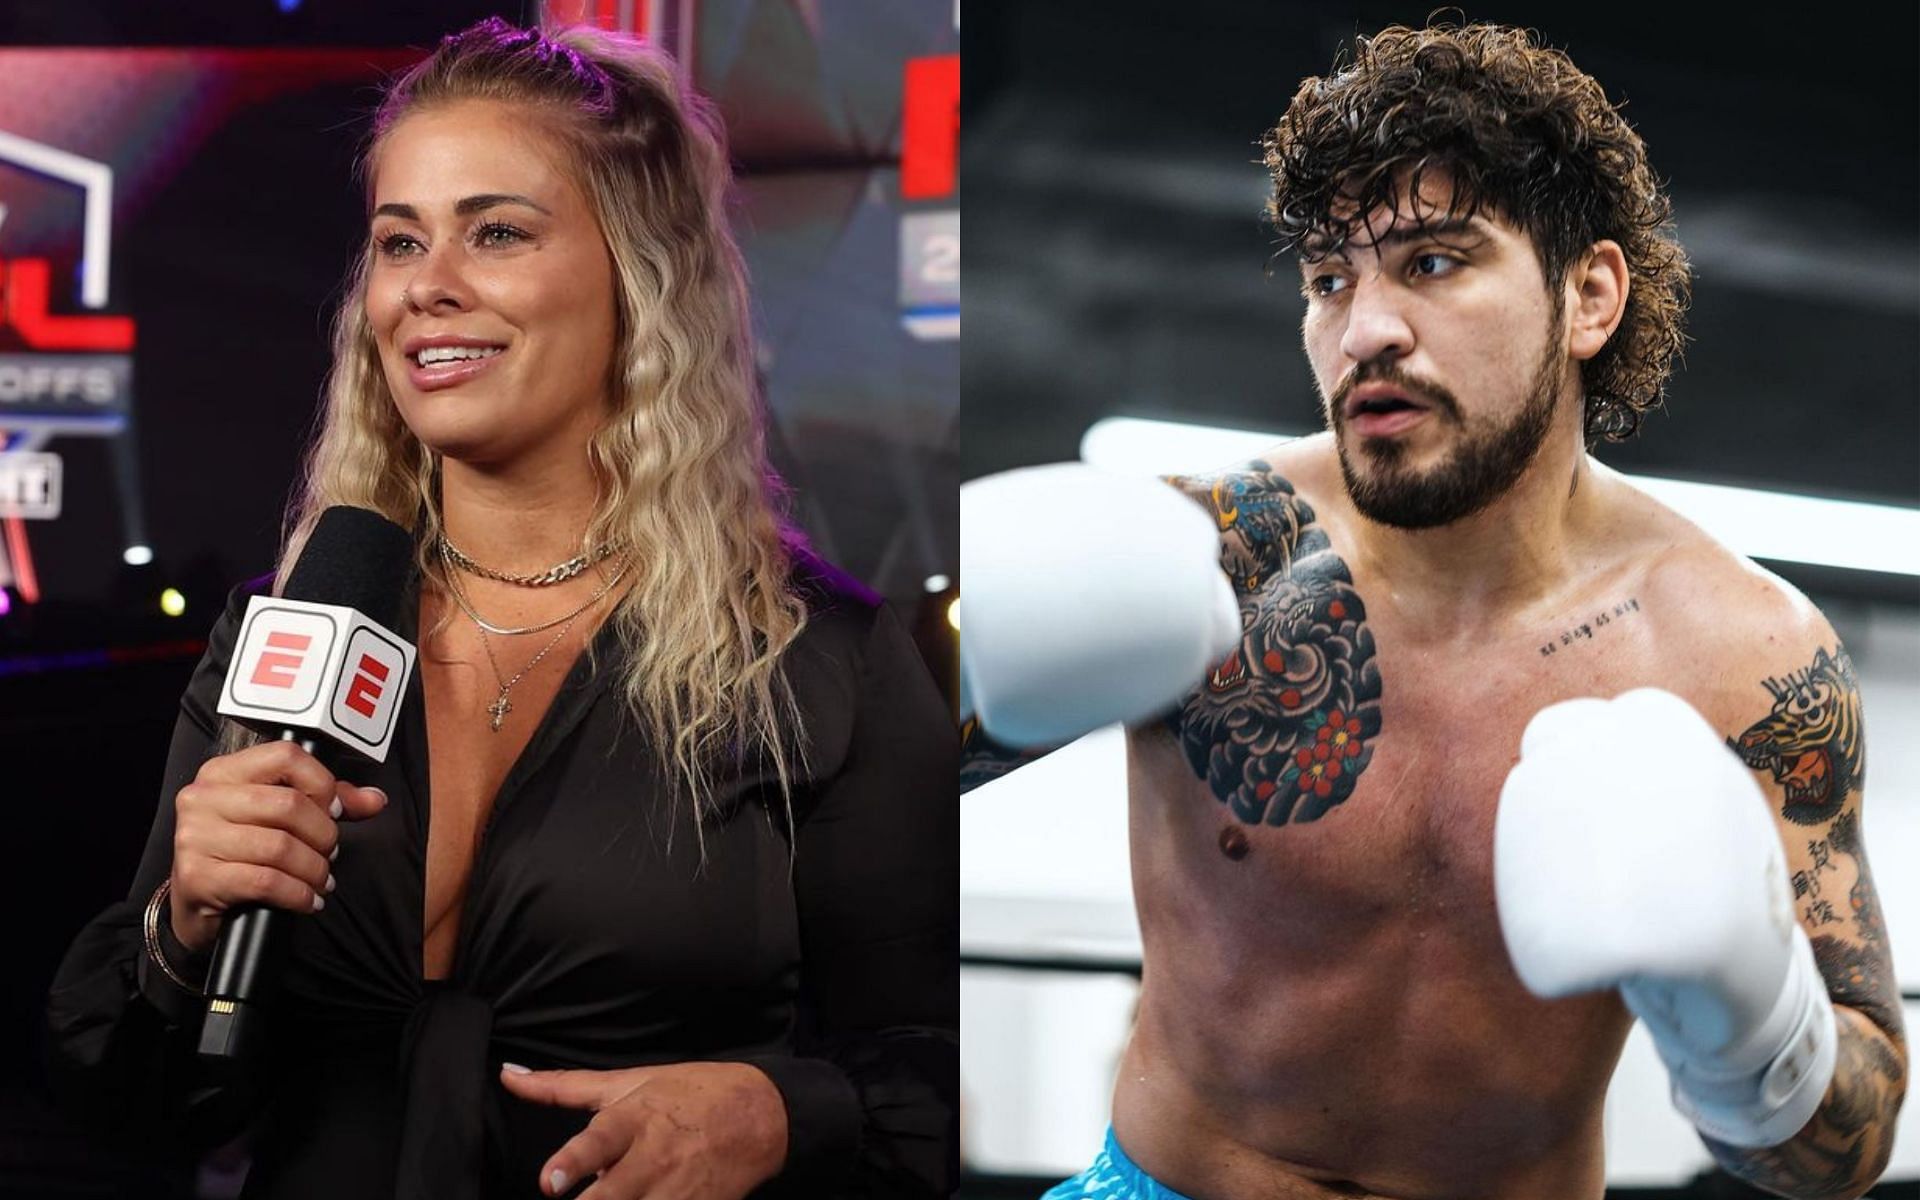 Paige VanZant (left) and Dillon Danis (right) have been exchanging barbs on social media [Images courtesy: @paigevanzant and @dillondanis on Instagram]